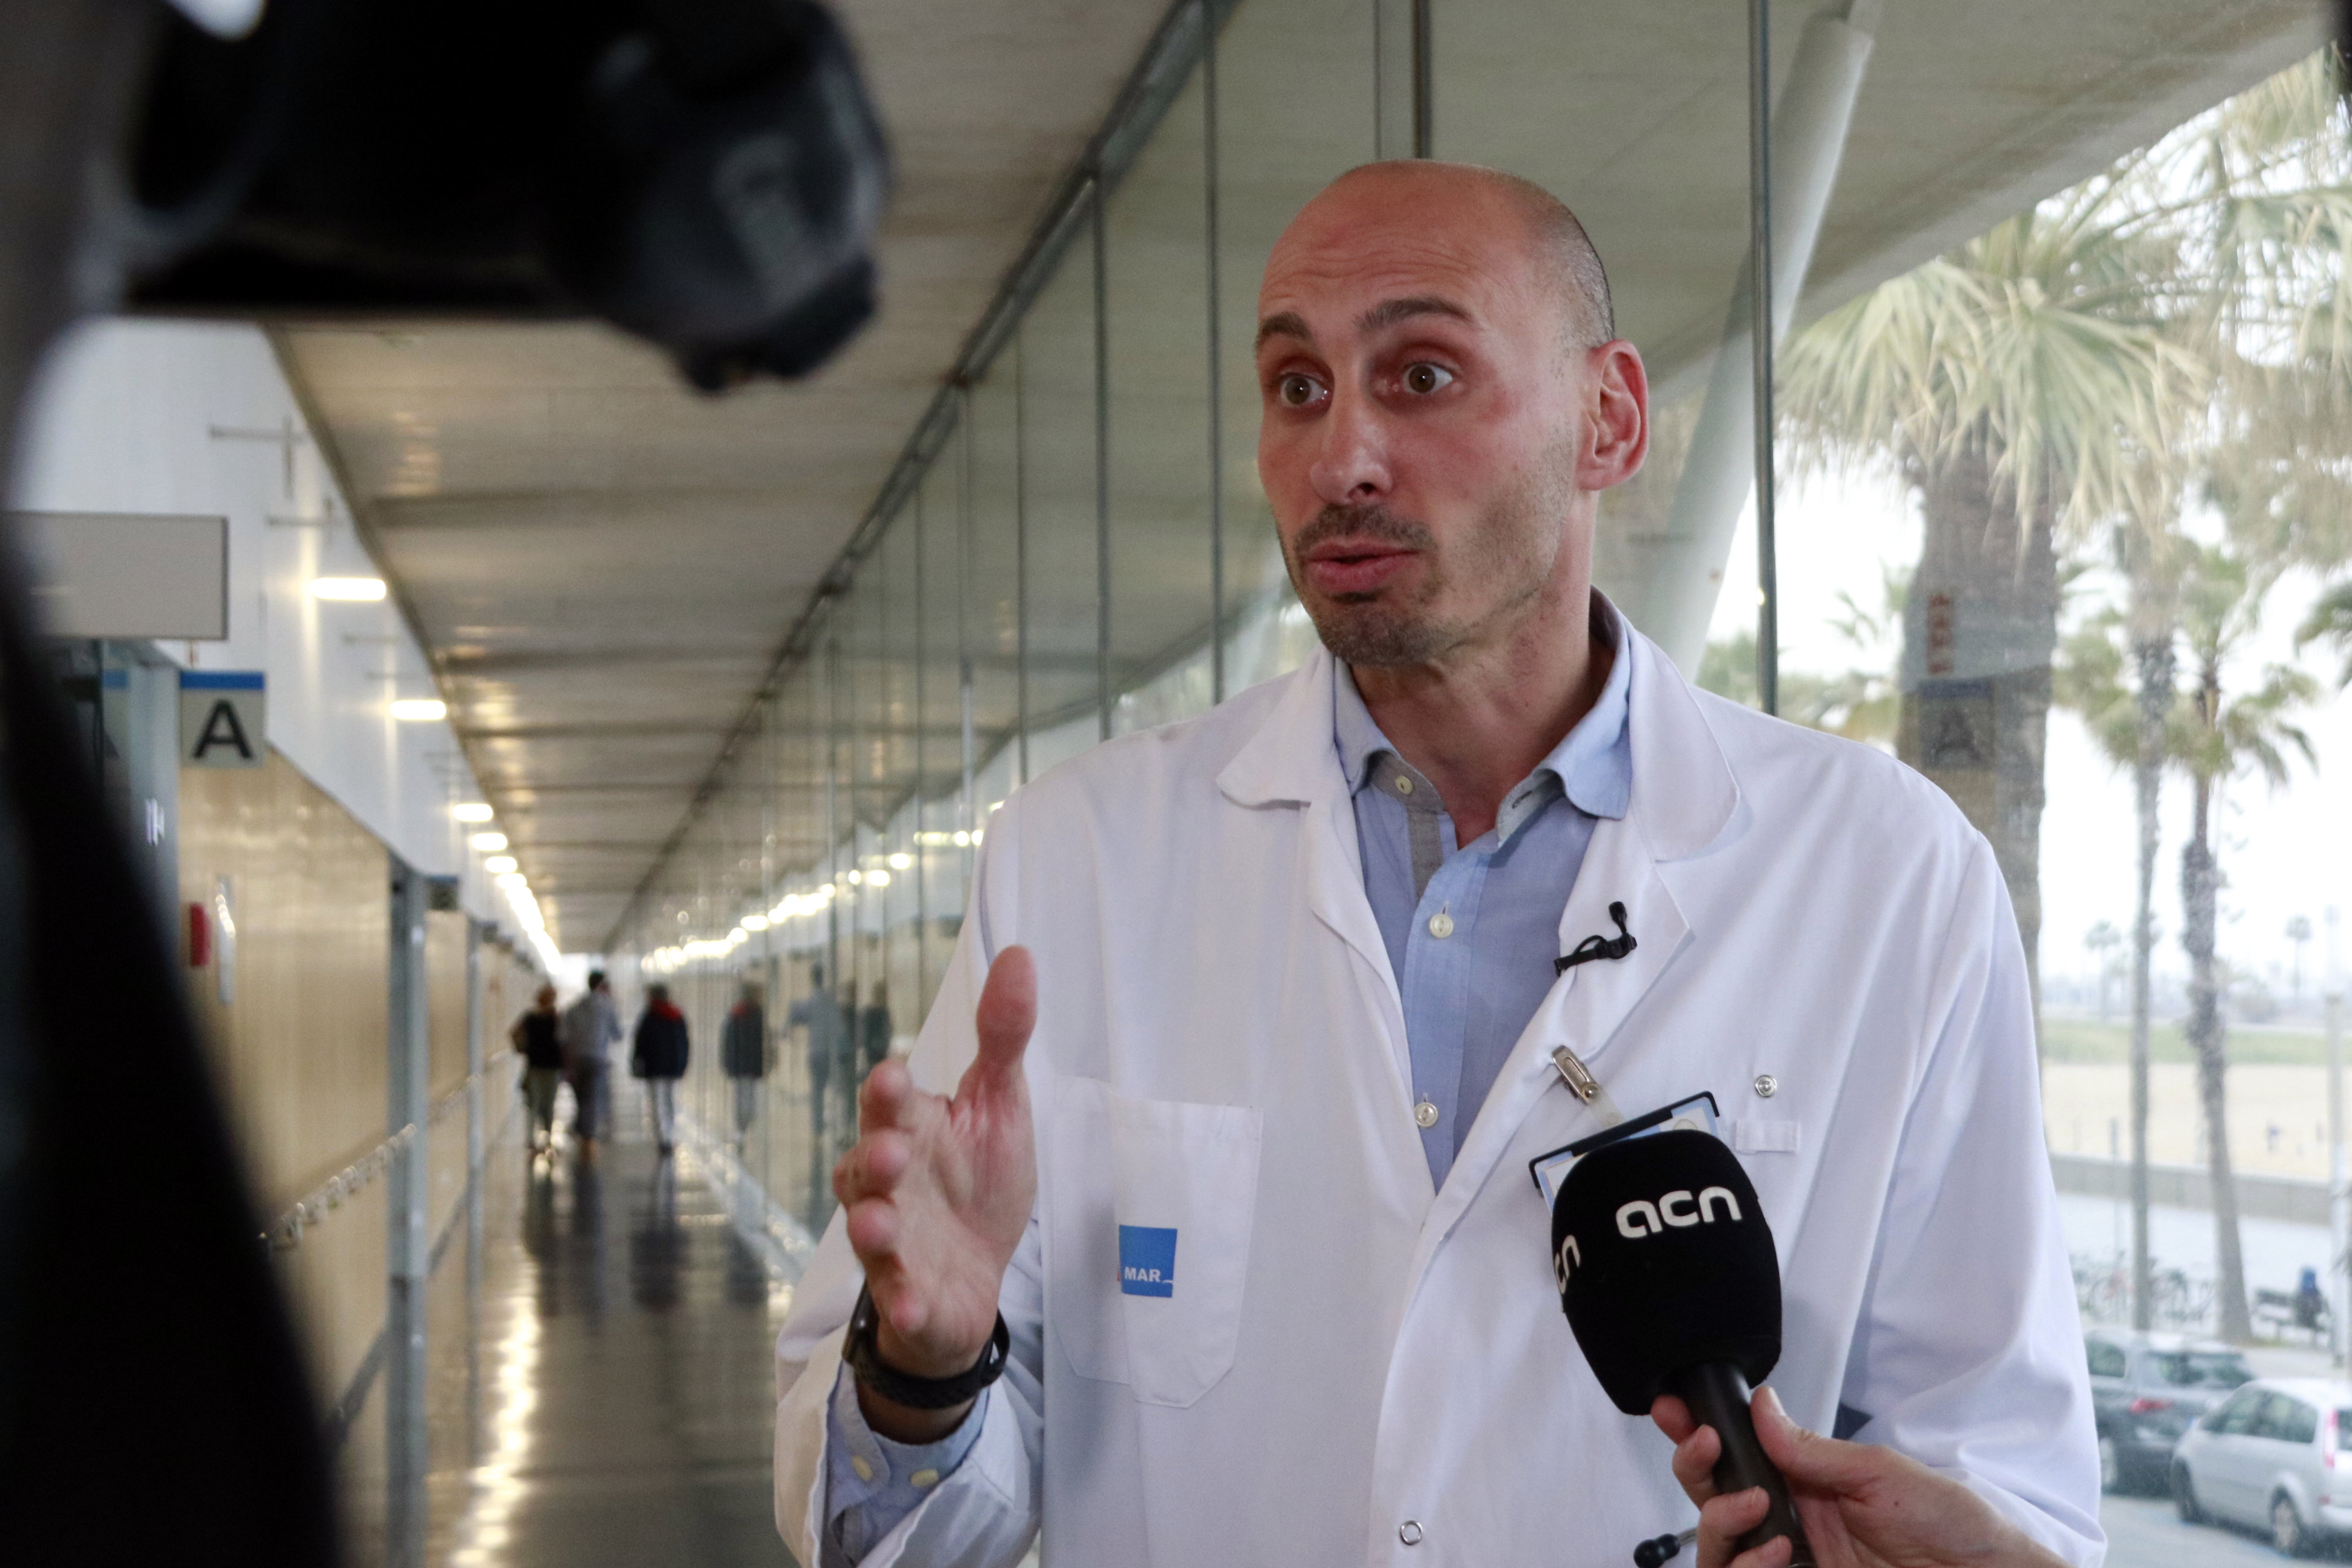 Dr Robert Güerri, the head of infectious diseases at Hospital del Mar, in an interview in April 2019 (by Laura Fíguls)